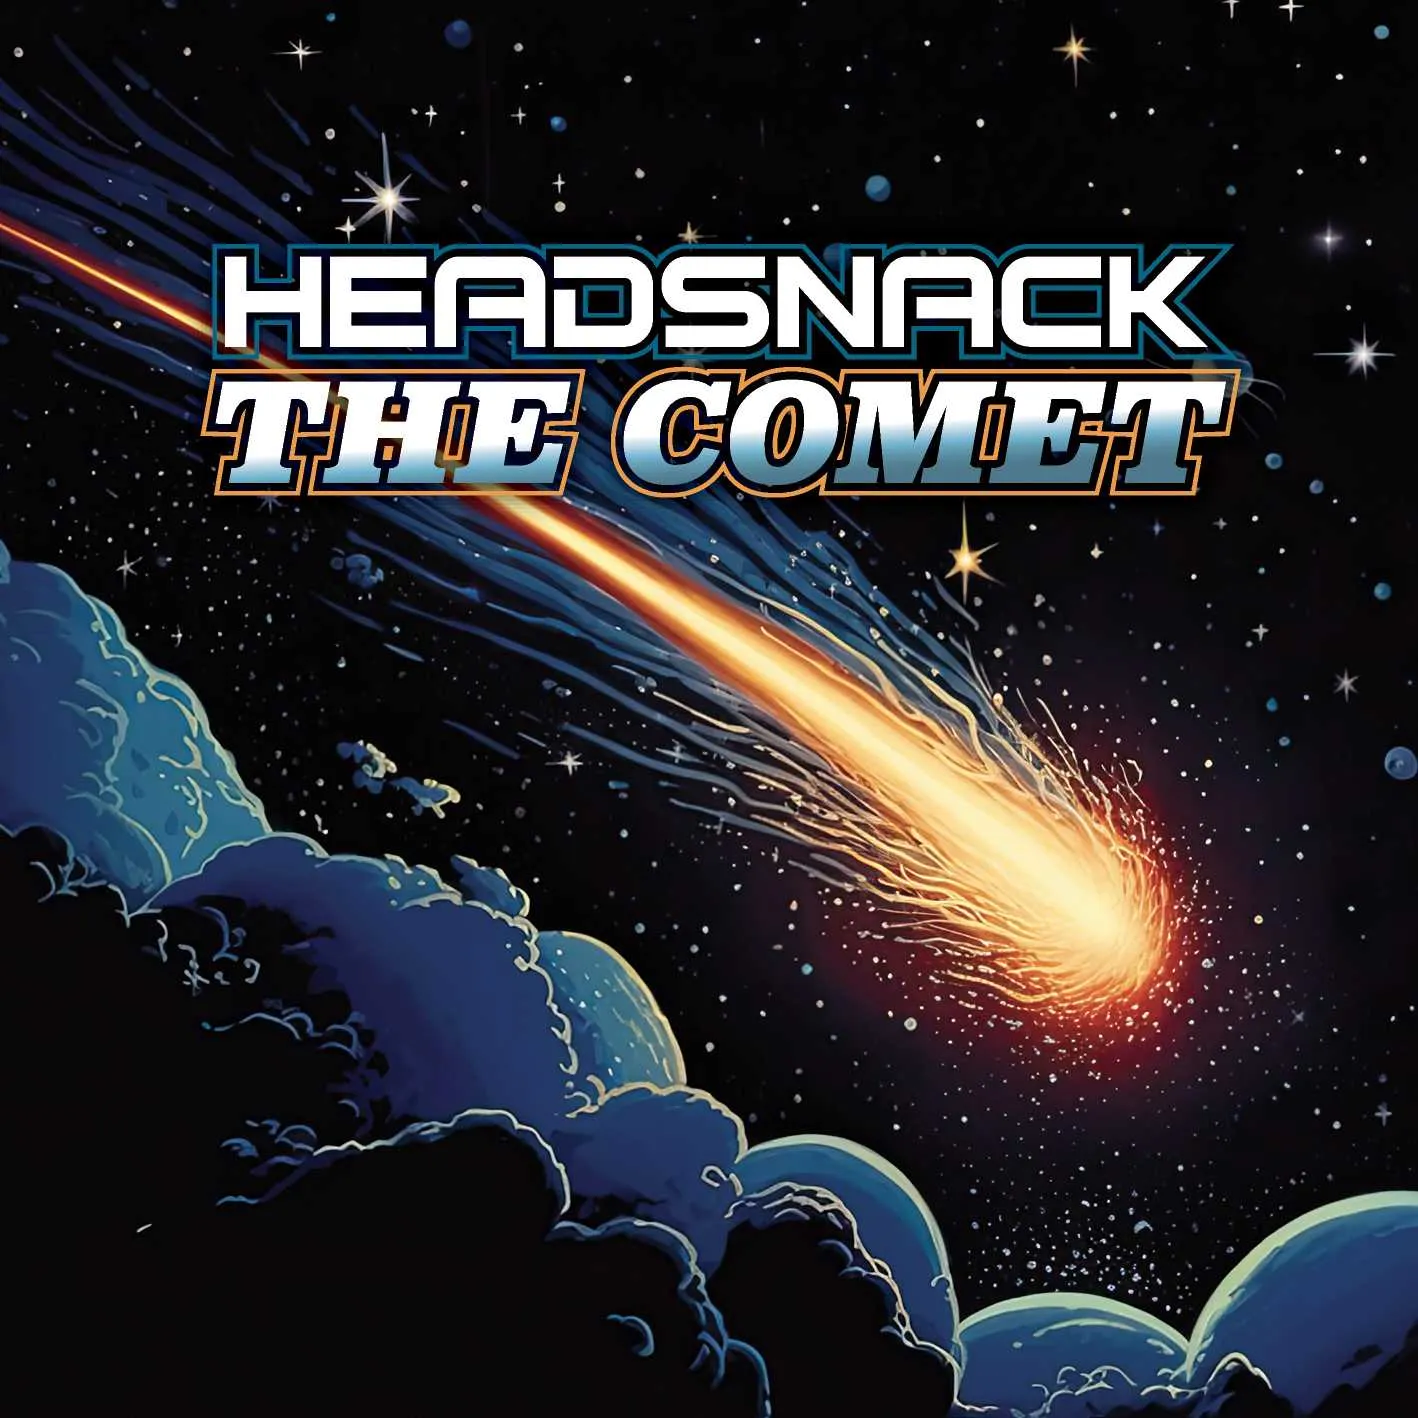 Album cover for “The Comet” by Headsnack